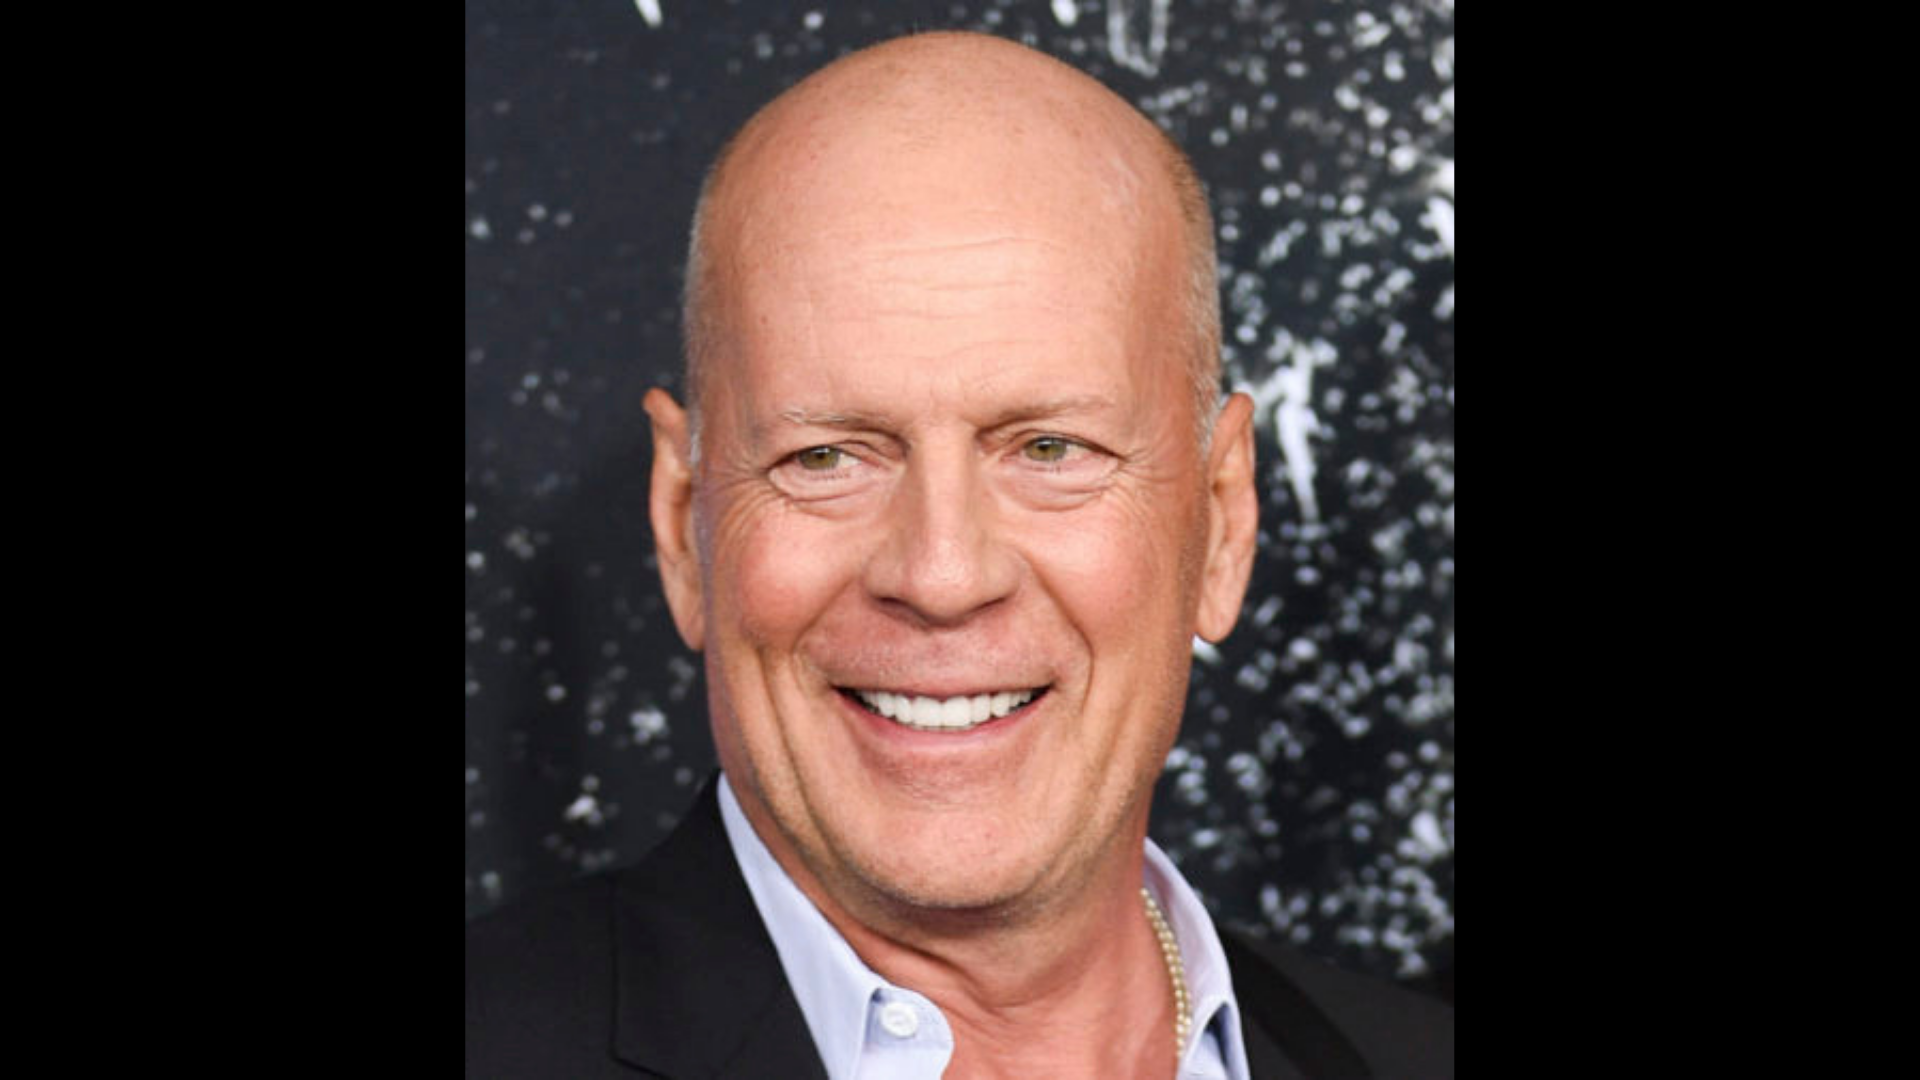 FILE - Actor Bruce Willis appears at the premiere of "Glass" in New York on Jan. 15, 2019. Willis i...